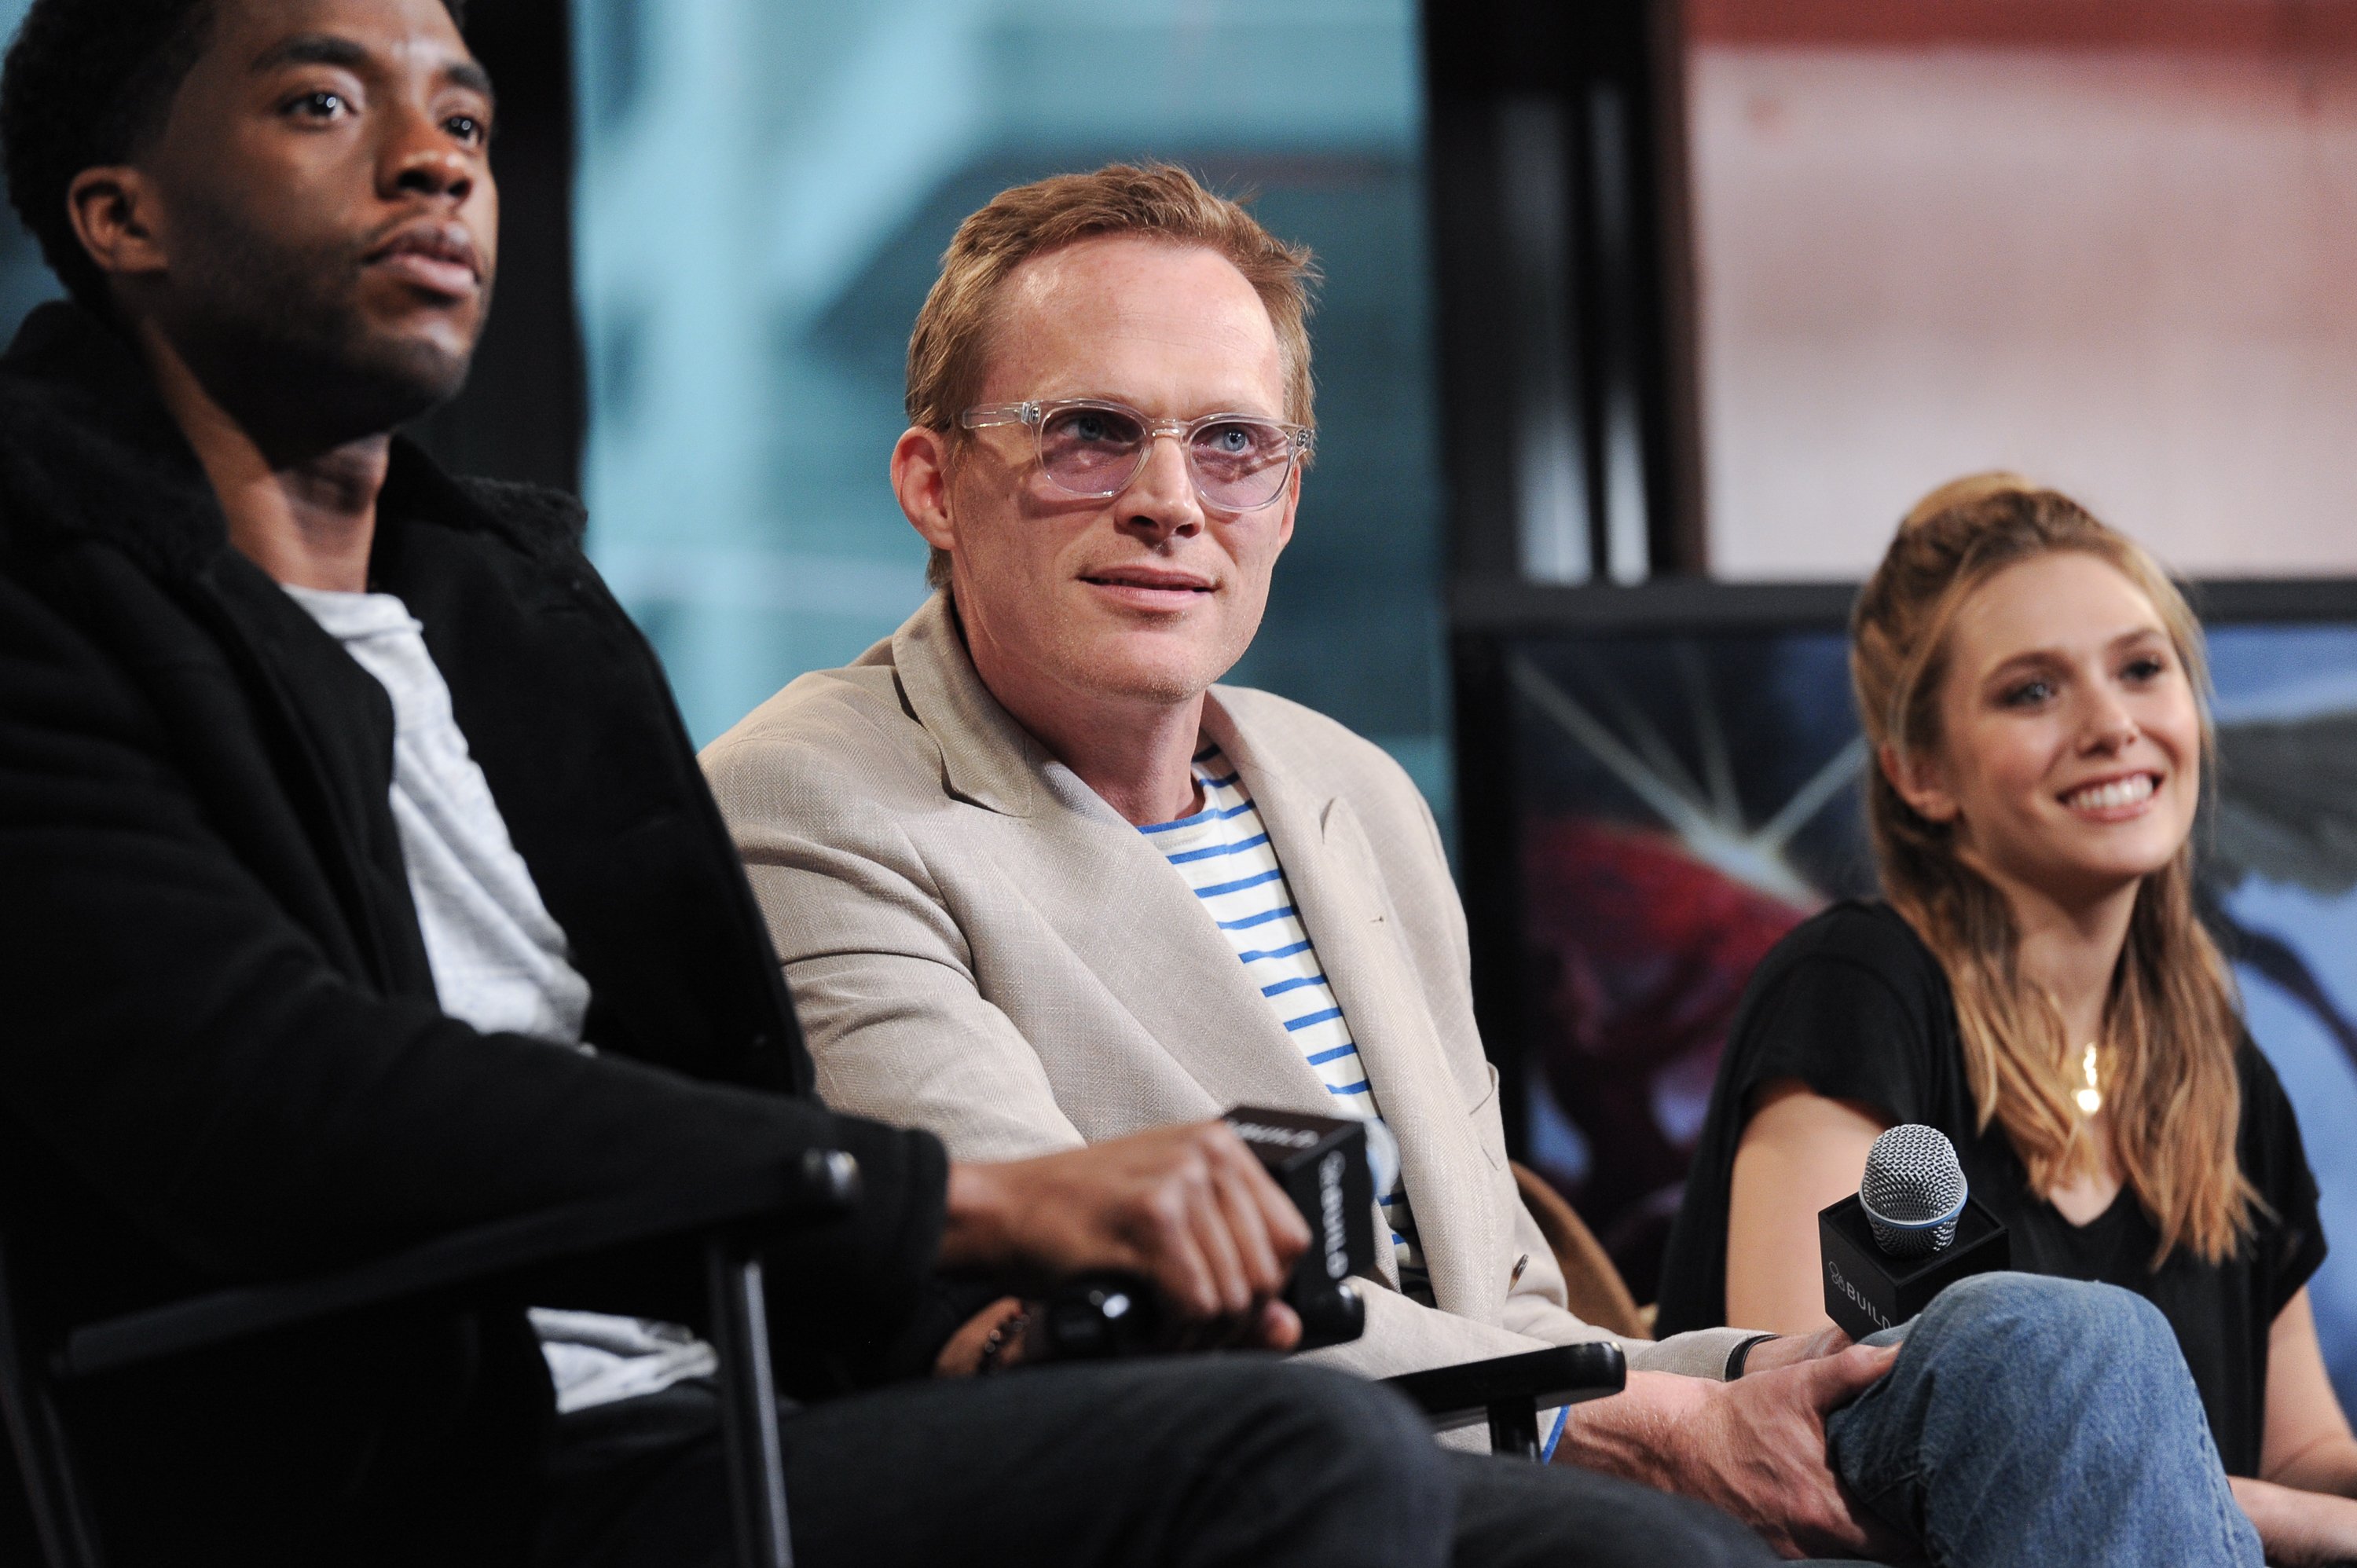 Chadwick Boseman, Paul Bettany, and Elizabeth Olsen attend AOL Build presents Captain America: Civil War directed by the Russo brothers